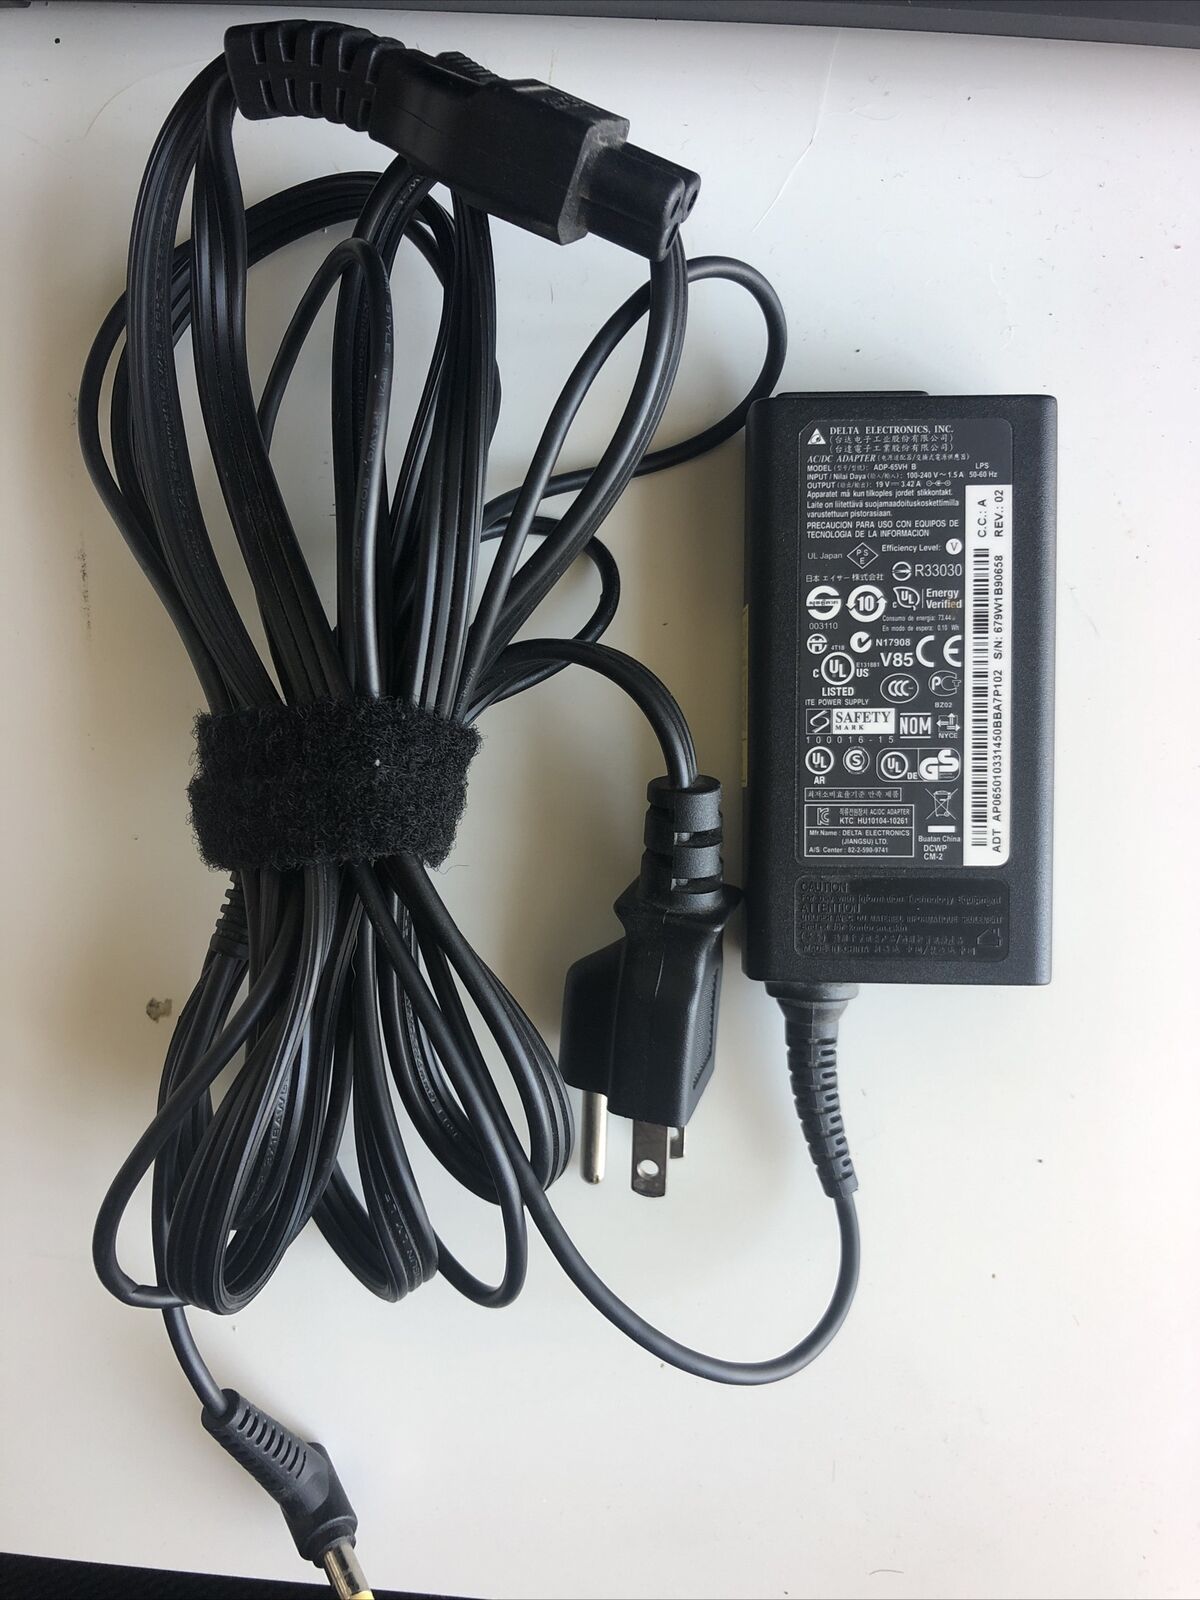 *Brand NEW*Genuine Delta Electronics 19V 3.42A AC Adapter 65W ADP-65VH B POWER Supply